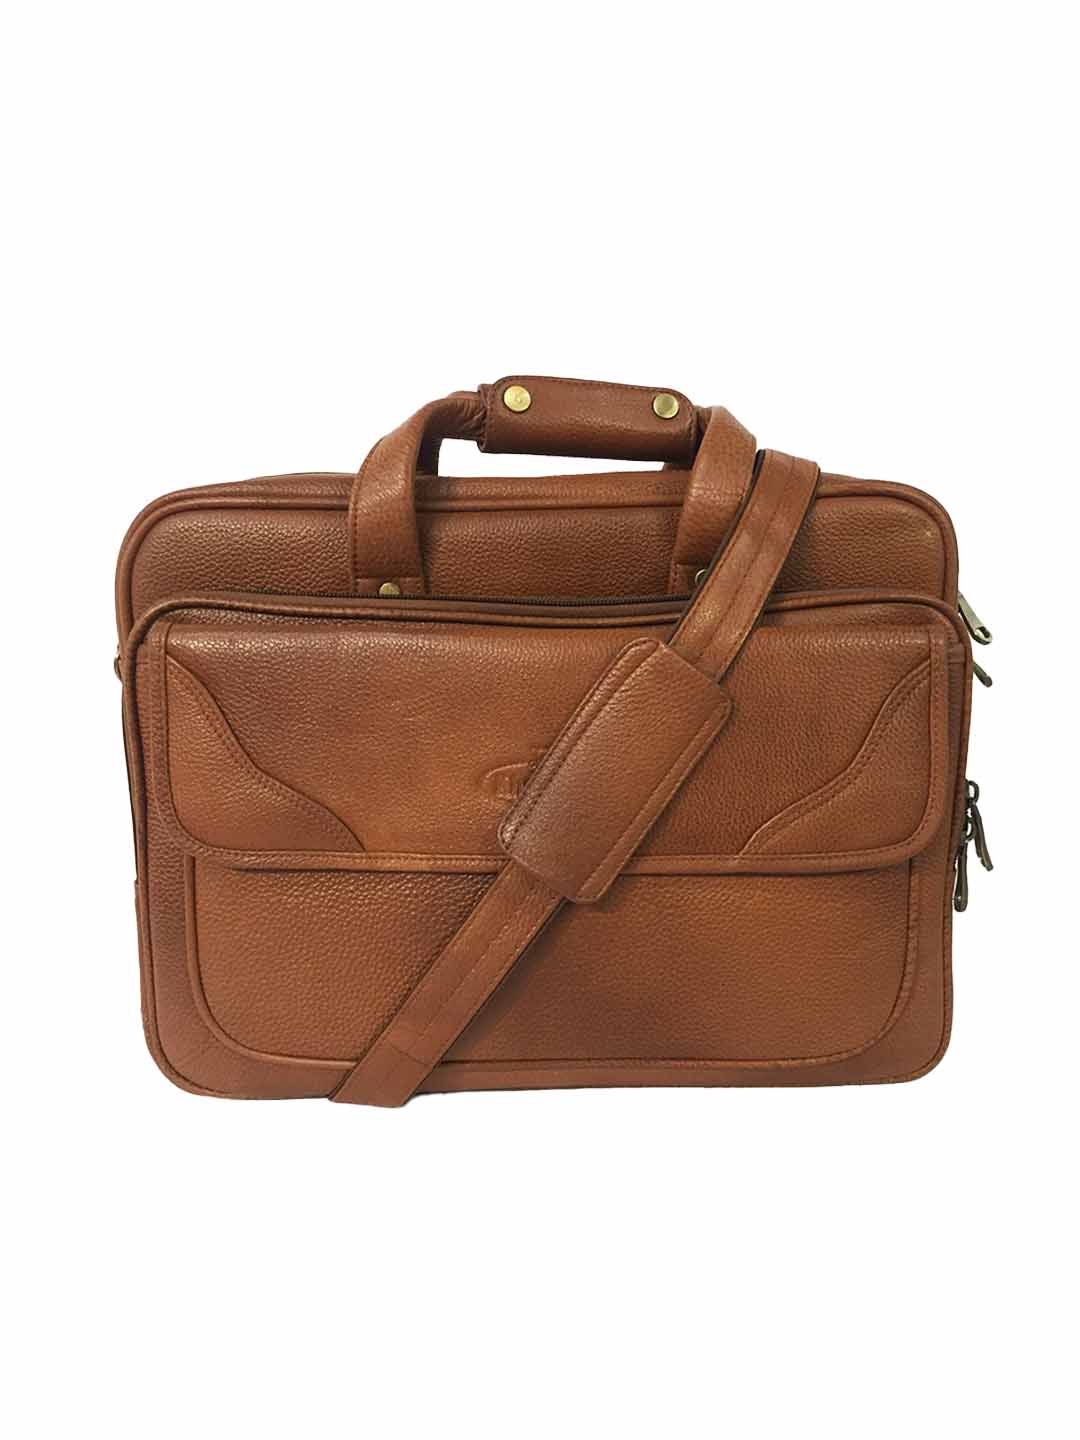 Buy Znt Bags Real Leather Brown Leather Duffel Bag 22 inch Large Travel Bag  Gym Sports Overnight Weekender Bag at Amazonin